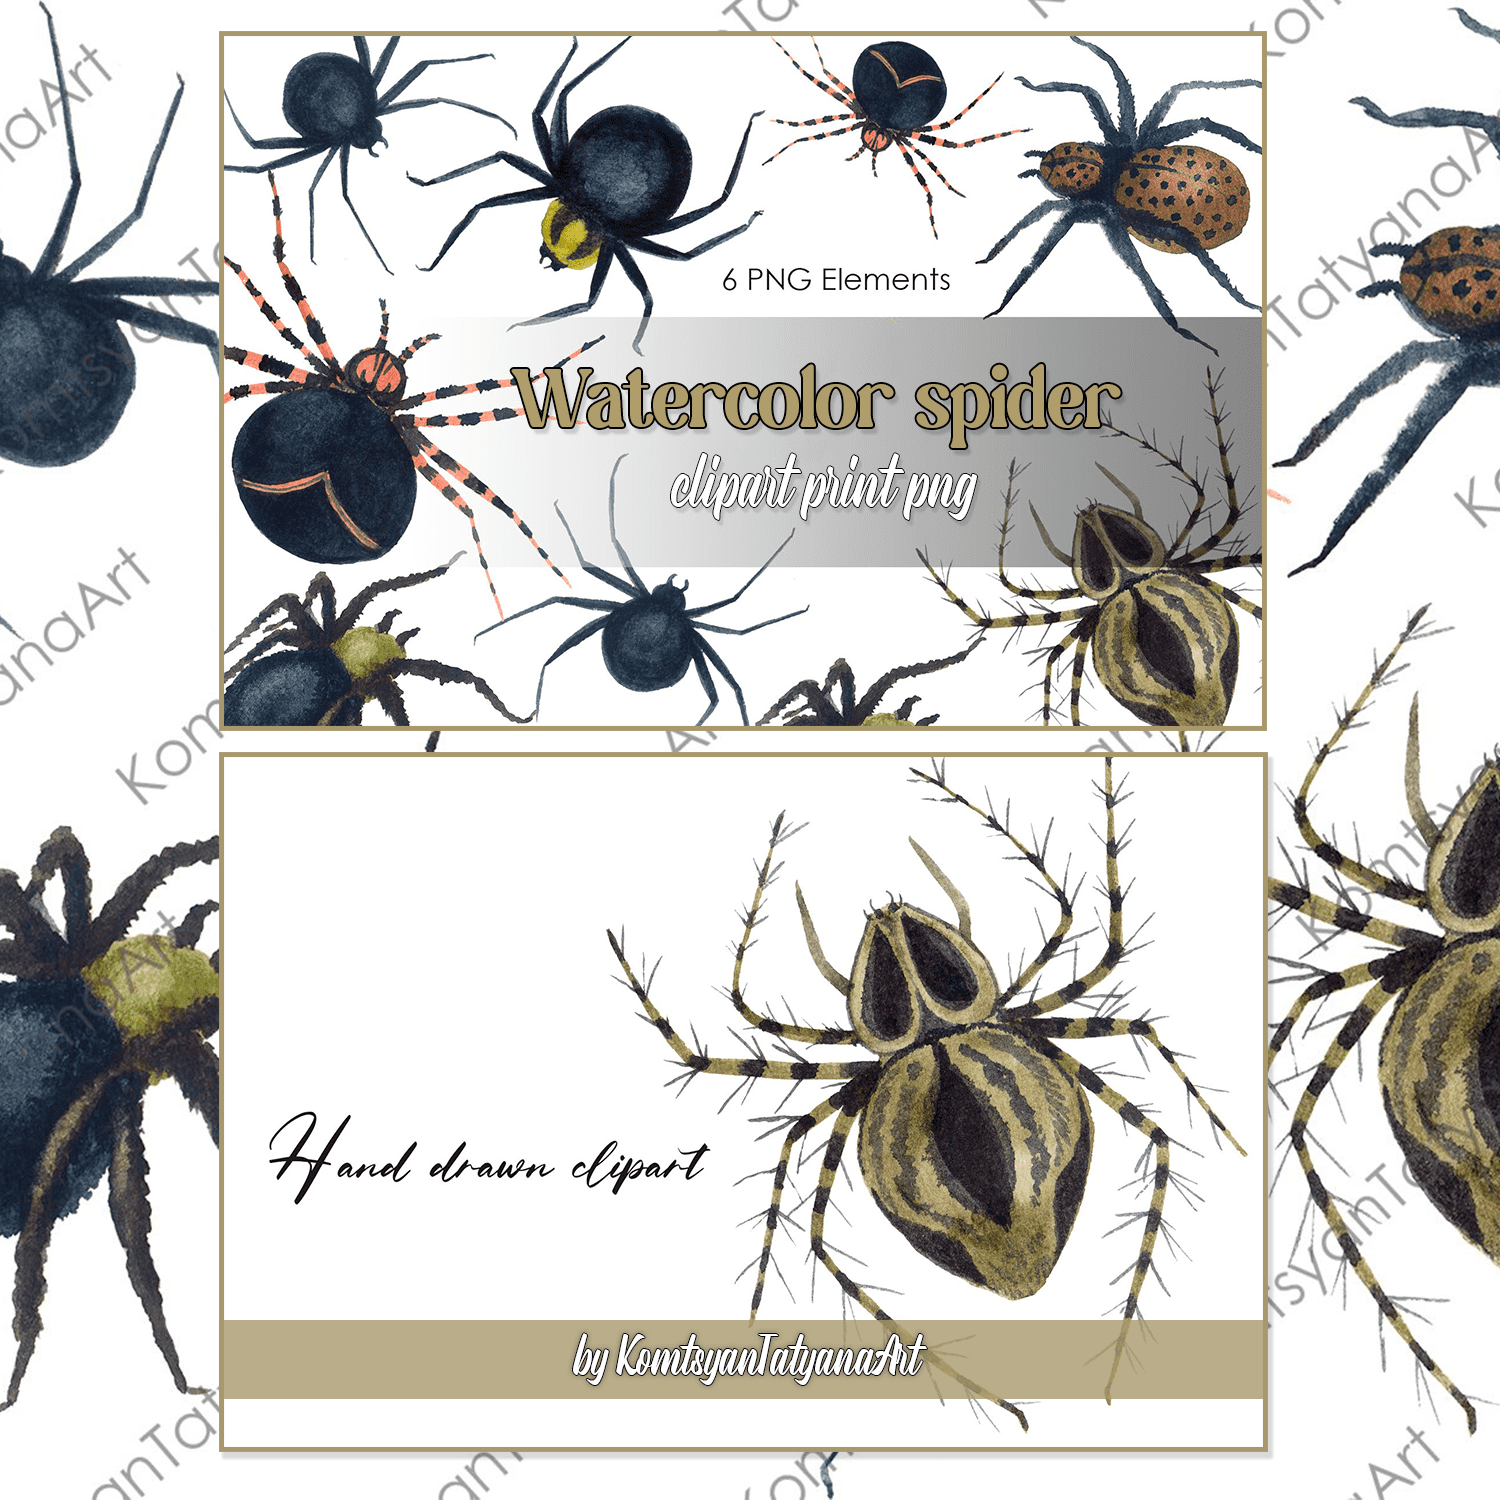 Watercolor spider clipart print png cover.